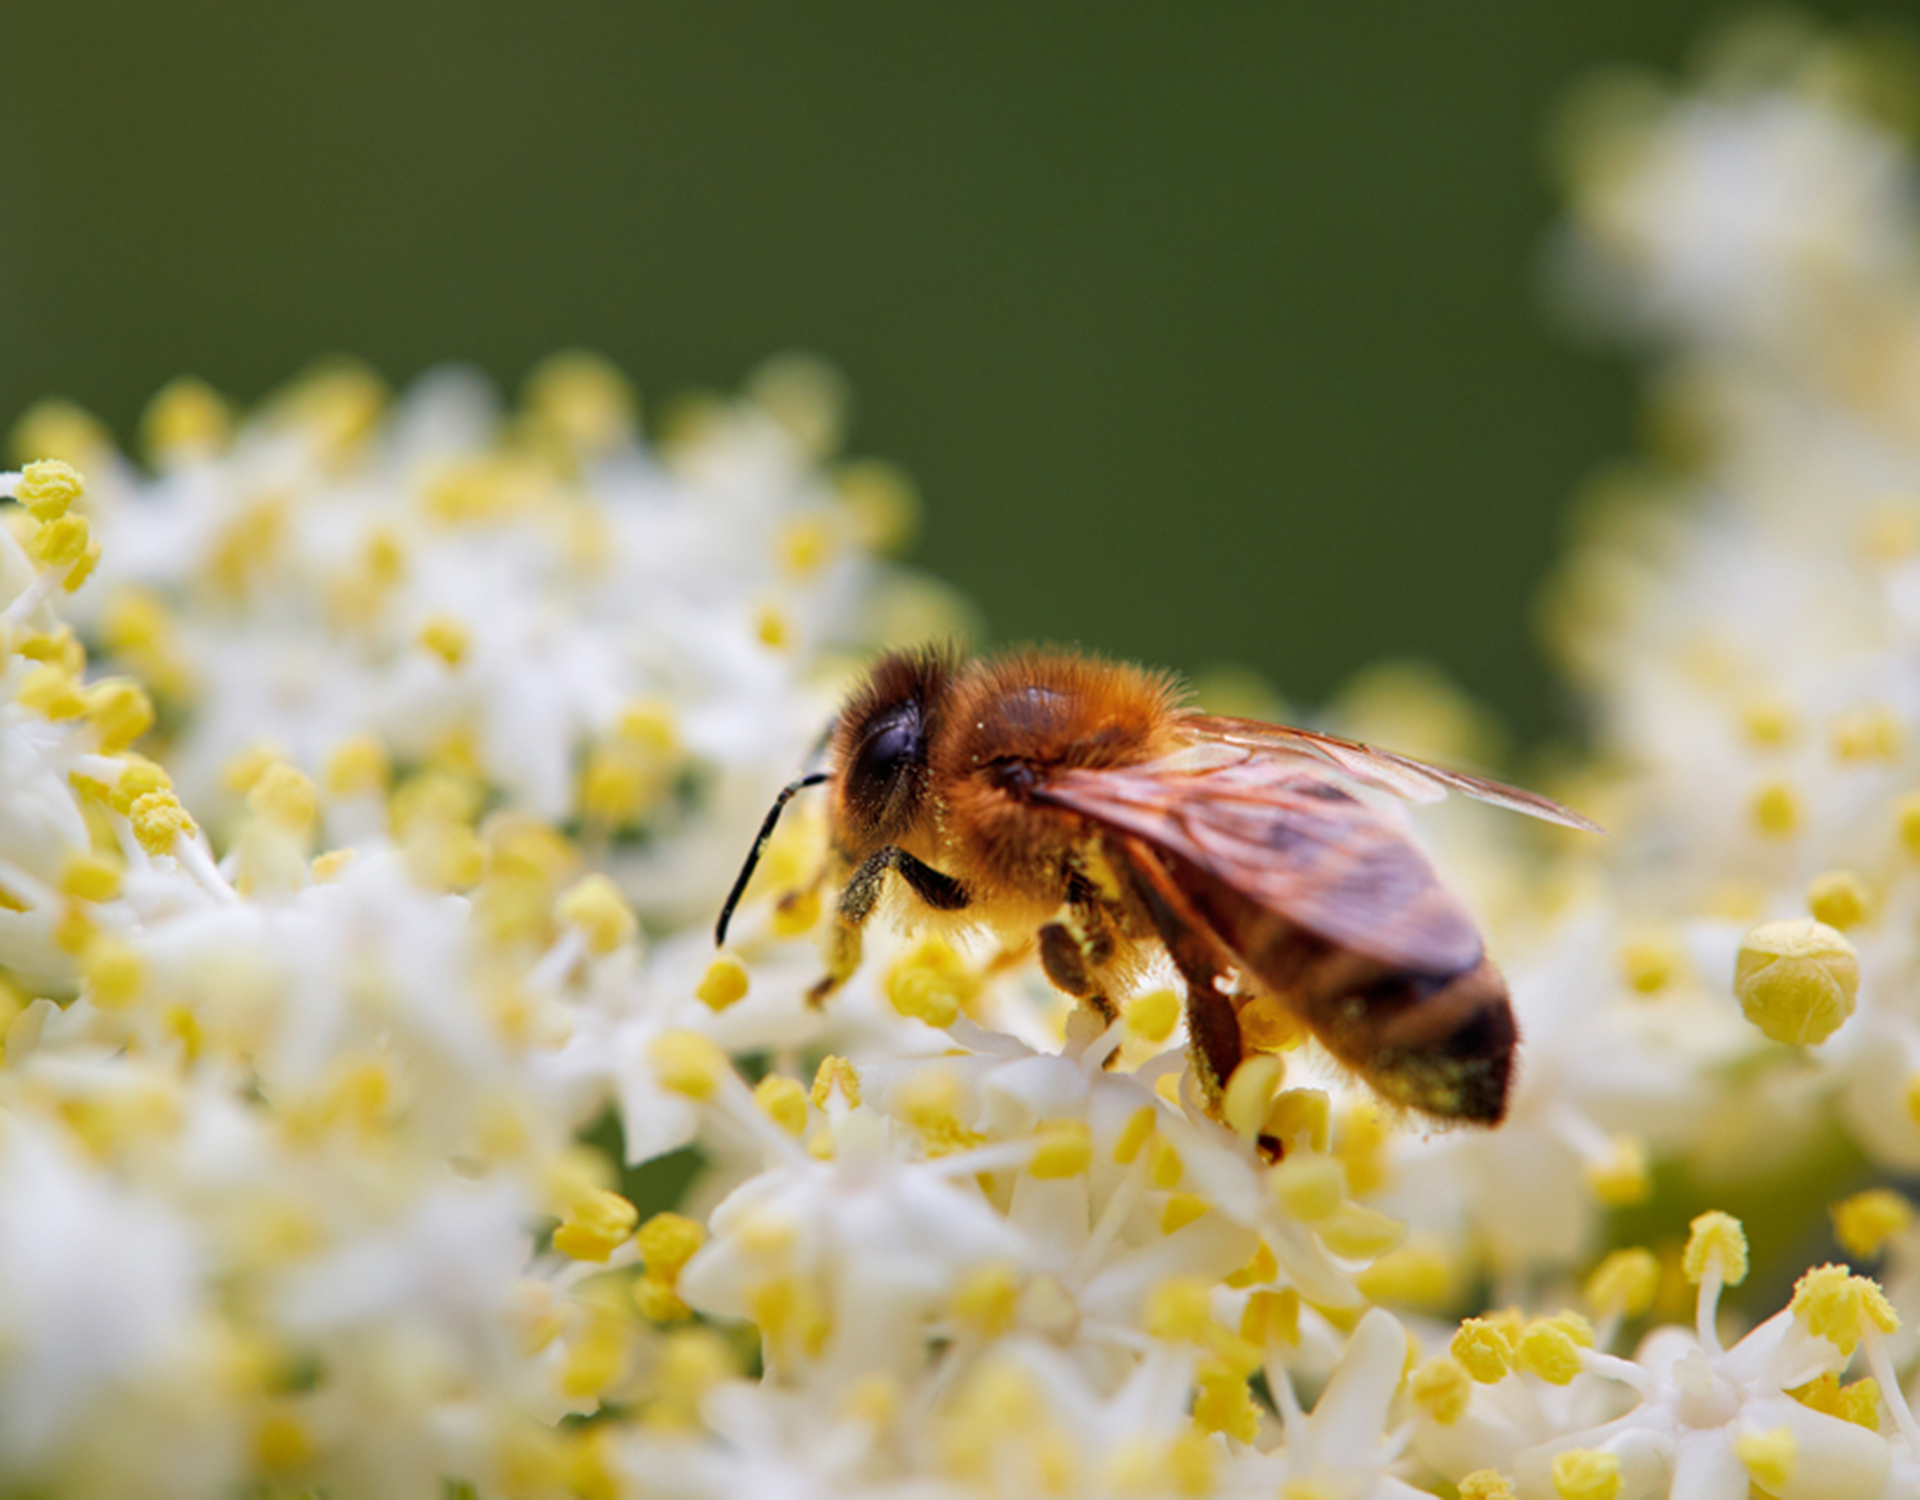 A honeybee rests on a group of white and yellow blossoms